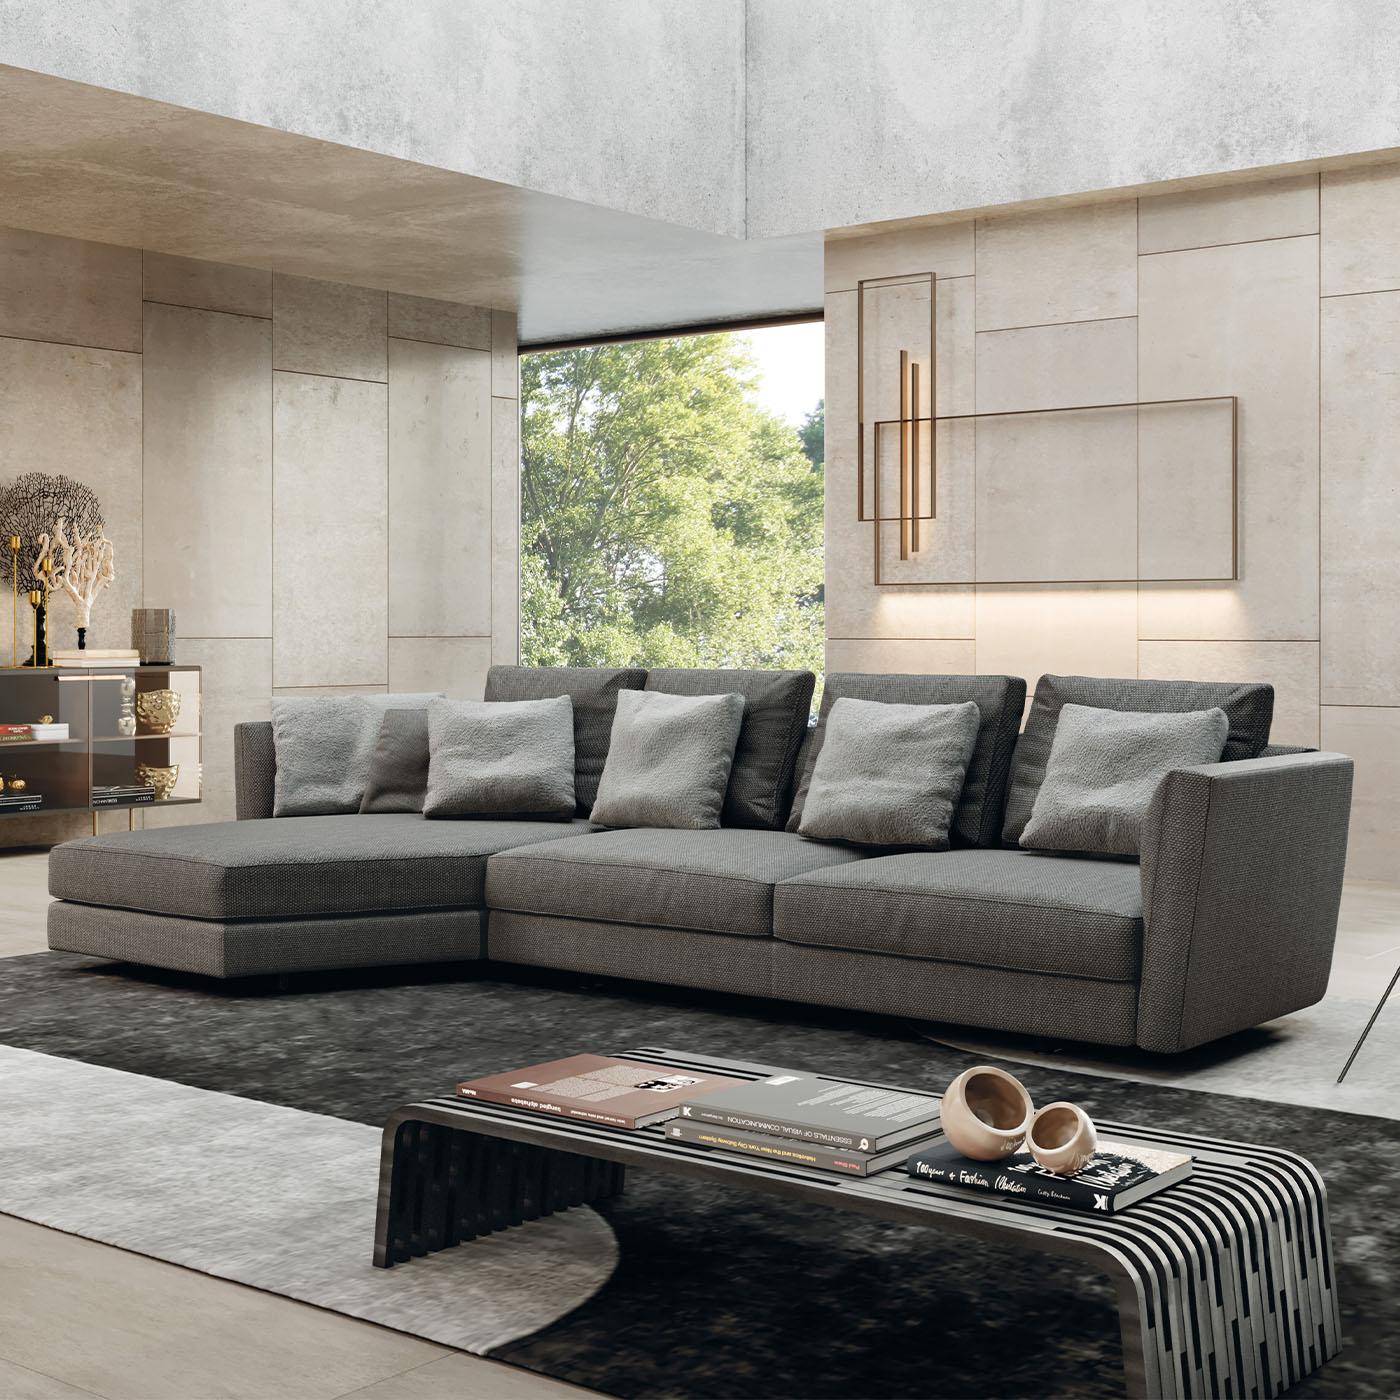 Crafted with a sturdy wooden frame and high-density foam padding, this sofa designed by Norberto Delfinetti ensures both durability and relaxation. The seat cushions are tailored with polyurethane envelop comfort, while the feather-filled back